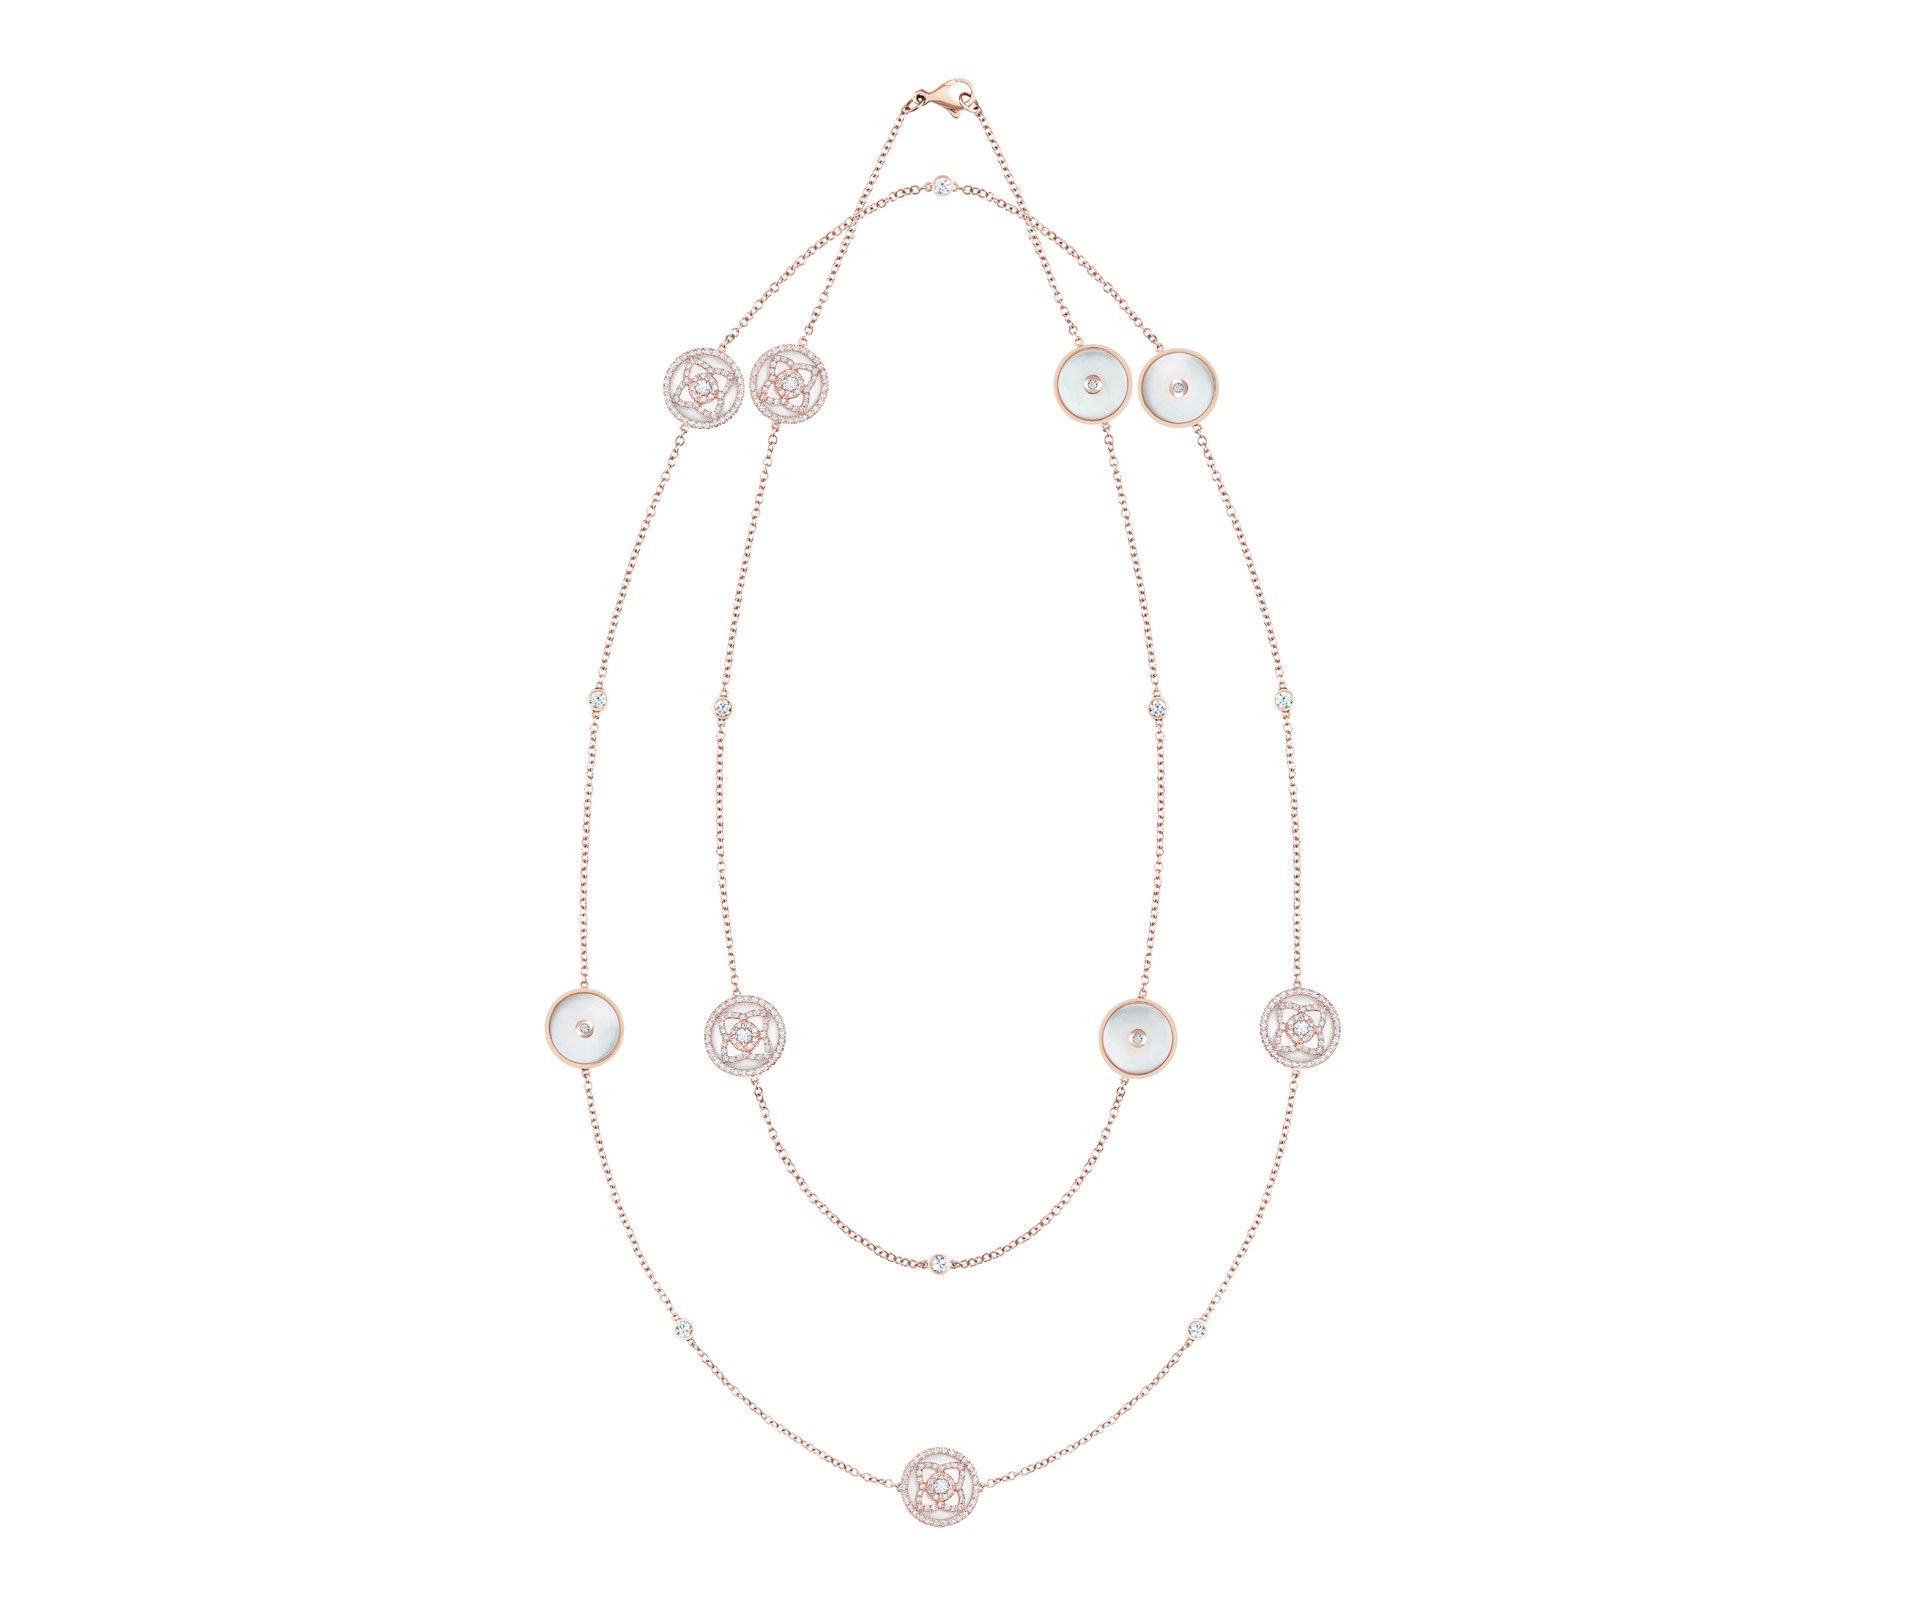 Enchanted Lotus Rose Gold & White Mother Of Pearl Sautoir Necklace In Latest Rose Gold Diamond Sautoir Necklaces (View 6 of 25)